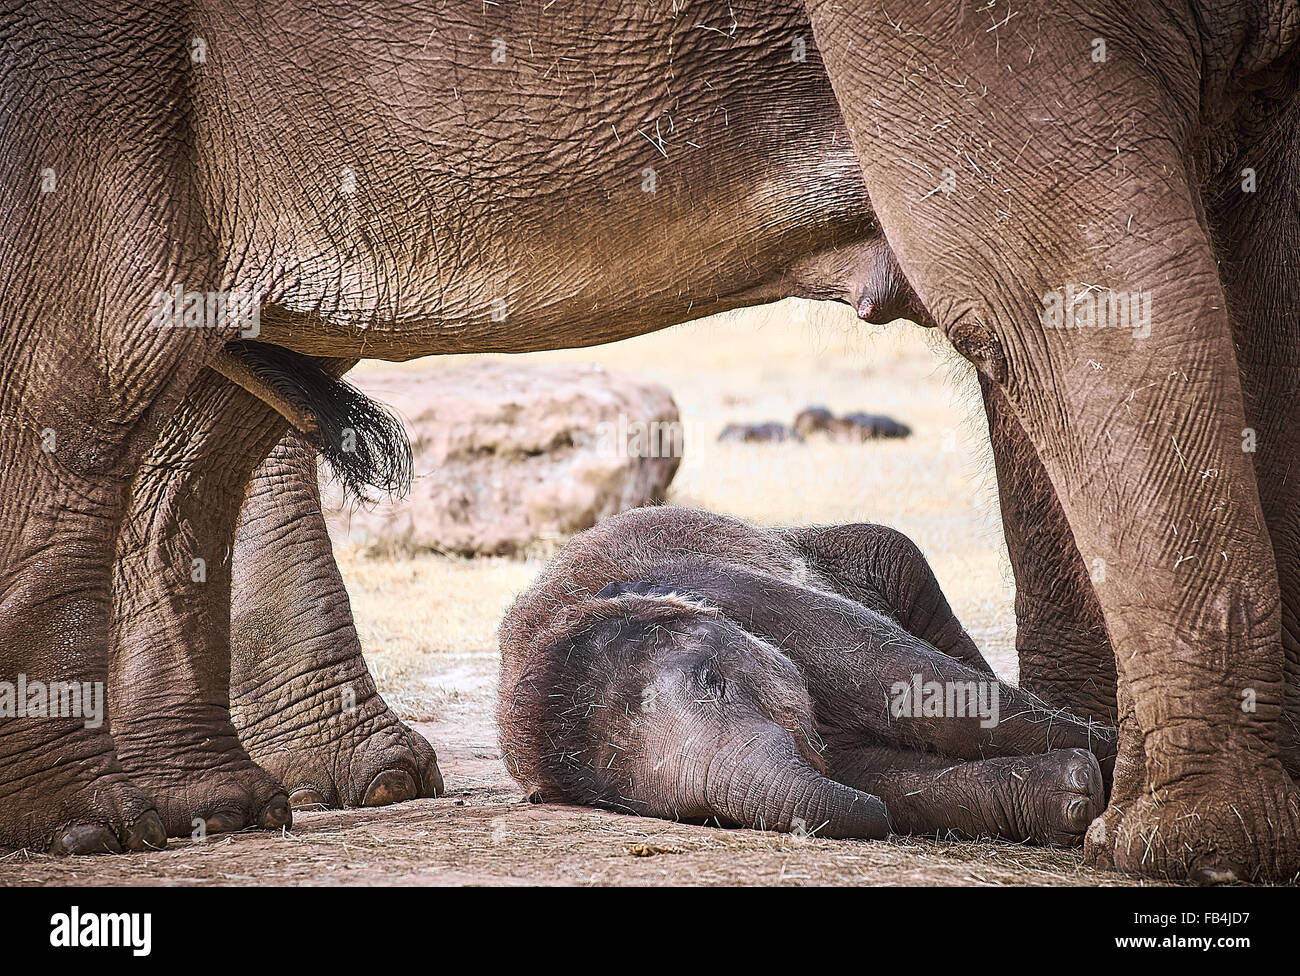 Baby Asian elephant relaxed underneath its mother Stock Photo